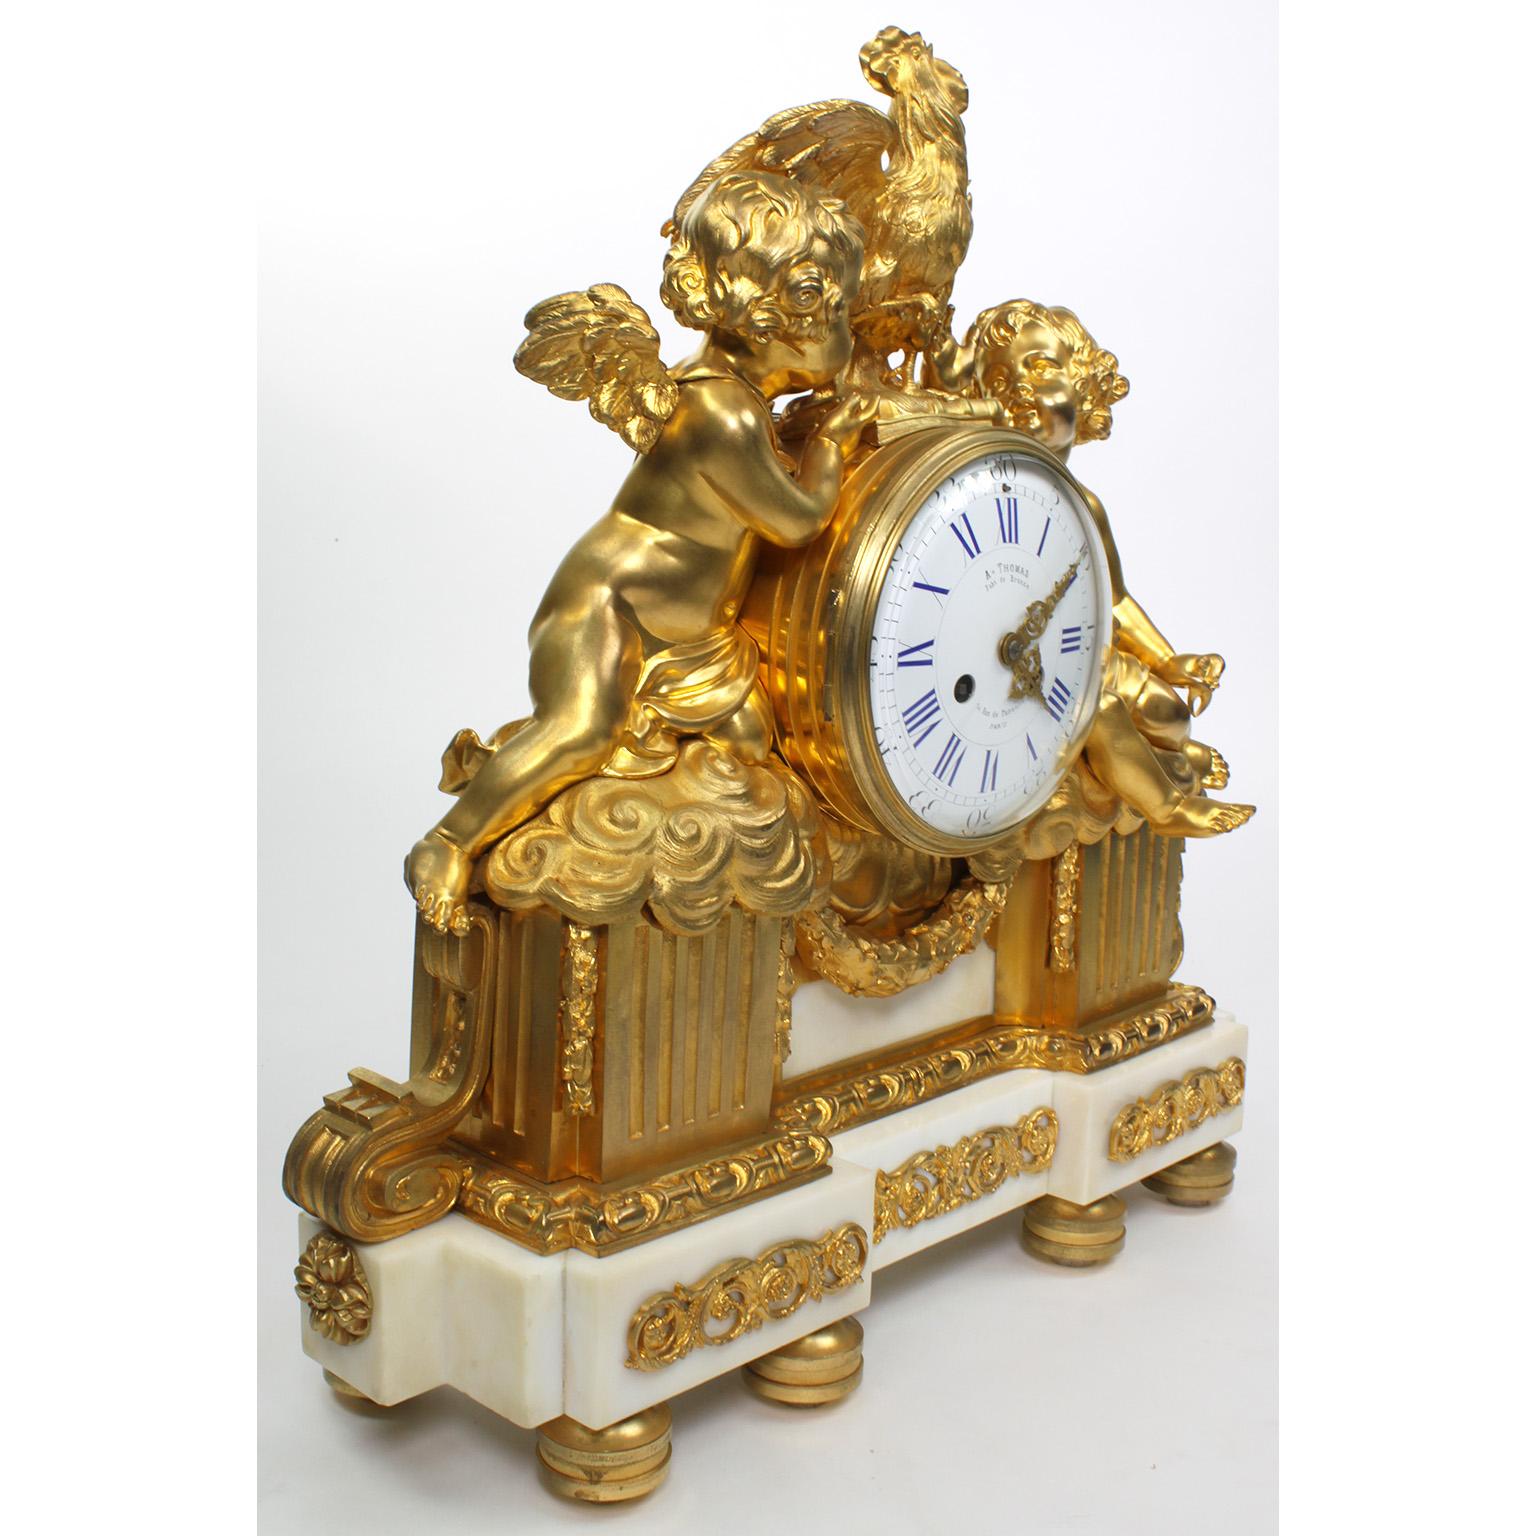 A very fine French 19th century Louis XV style gilt bronze and white marble figural mantel clock. The finely chased ormolu body, with its original two-tone mercury gilt, centered with a circular enameled porcelain clock face with Roman and Arabic